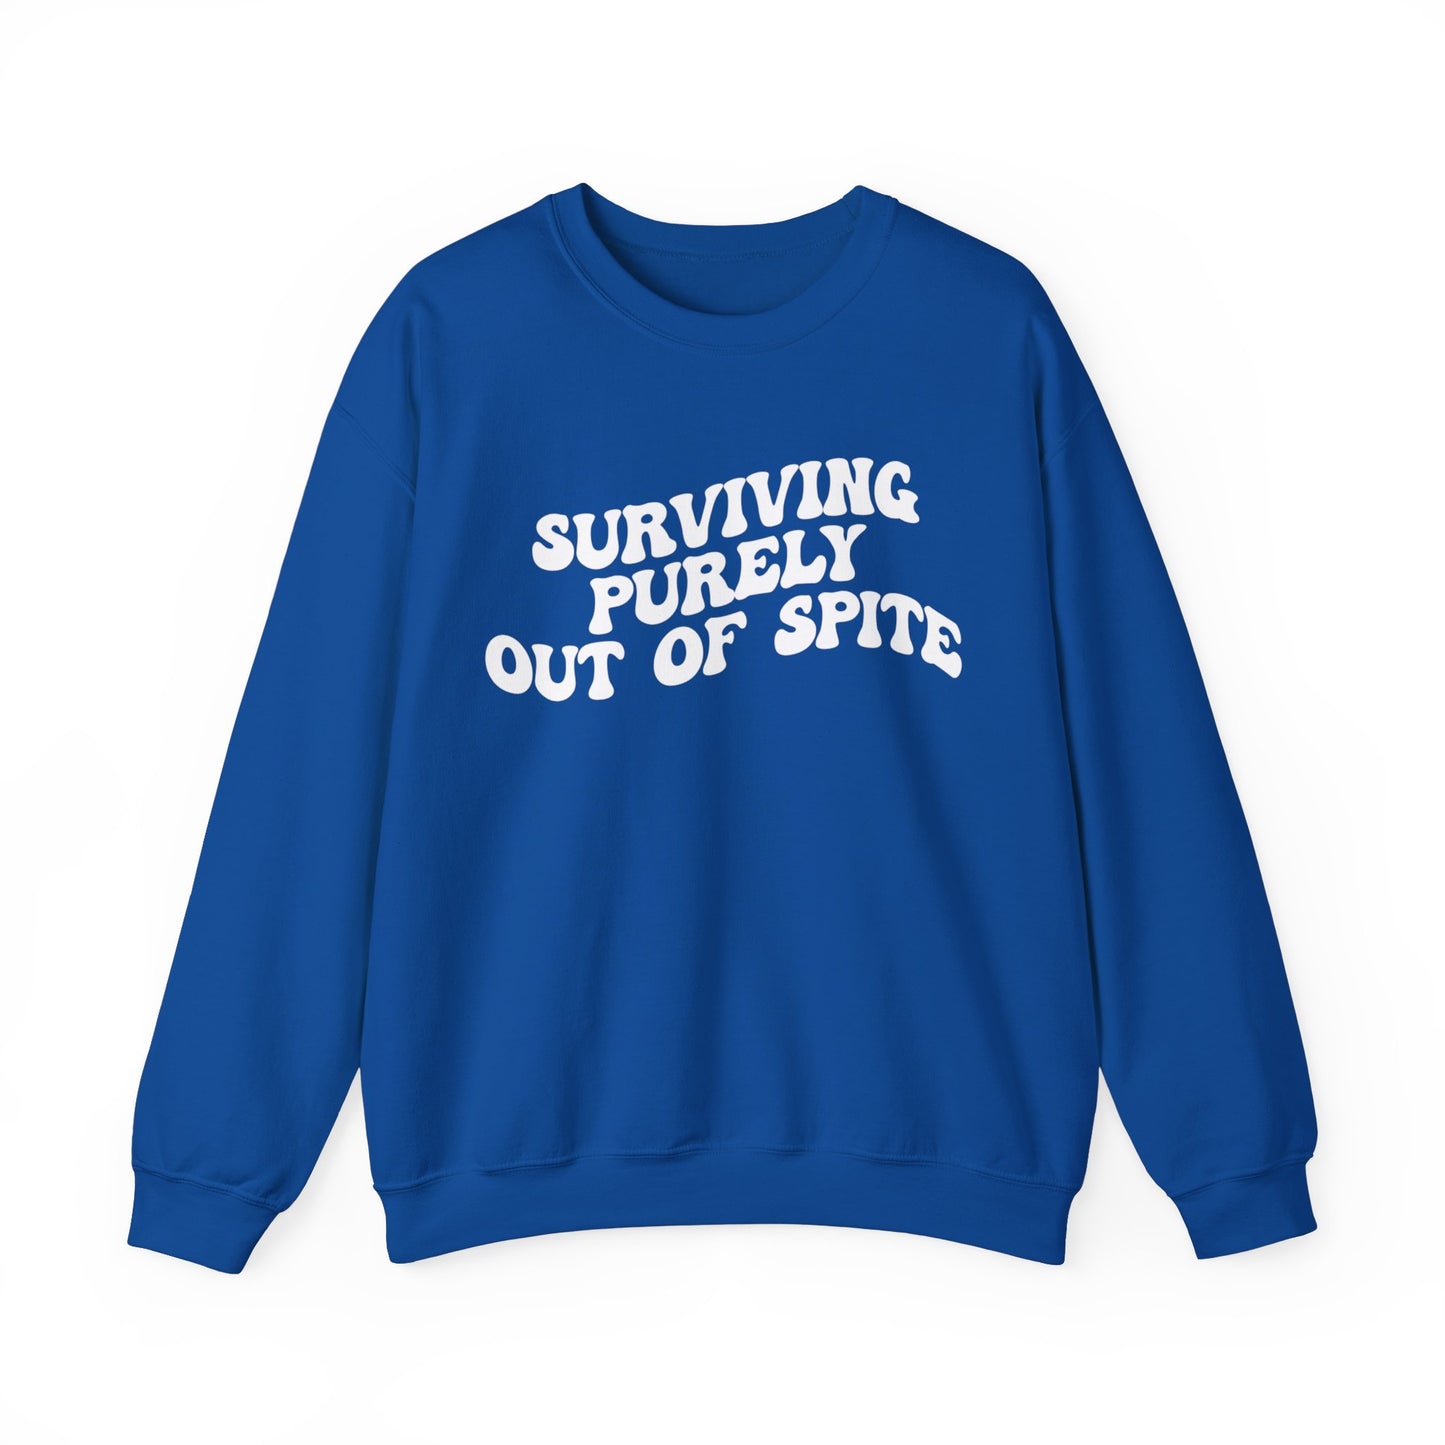 Surviving Purely Out of Spite Sweatshirt, Mental Health, Cancer Survivor, Survivor Sweatshirt, Strong Empowered Women, Iron Lady, S1408